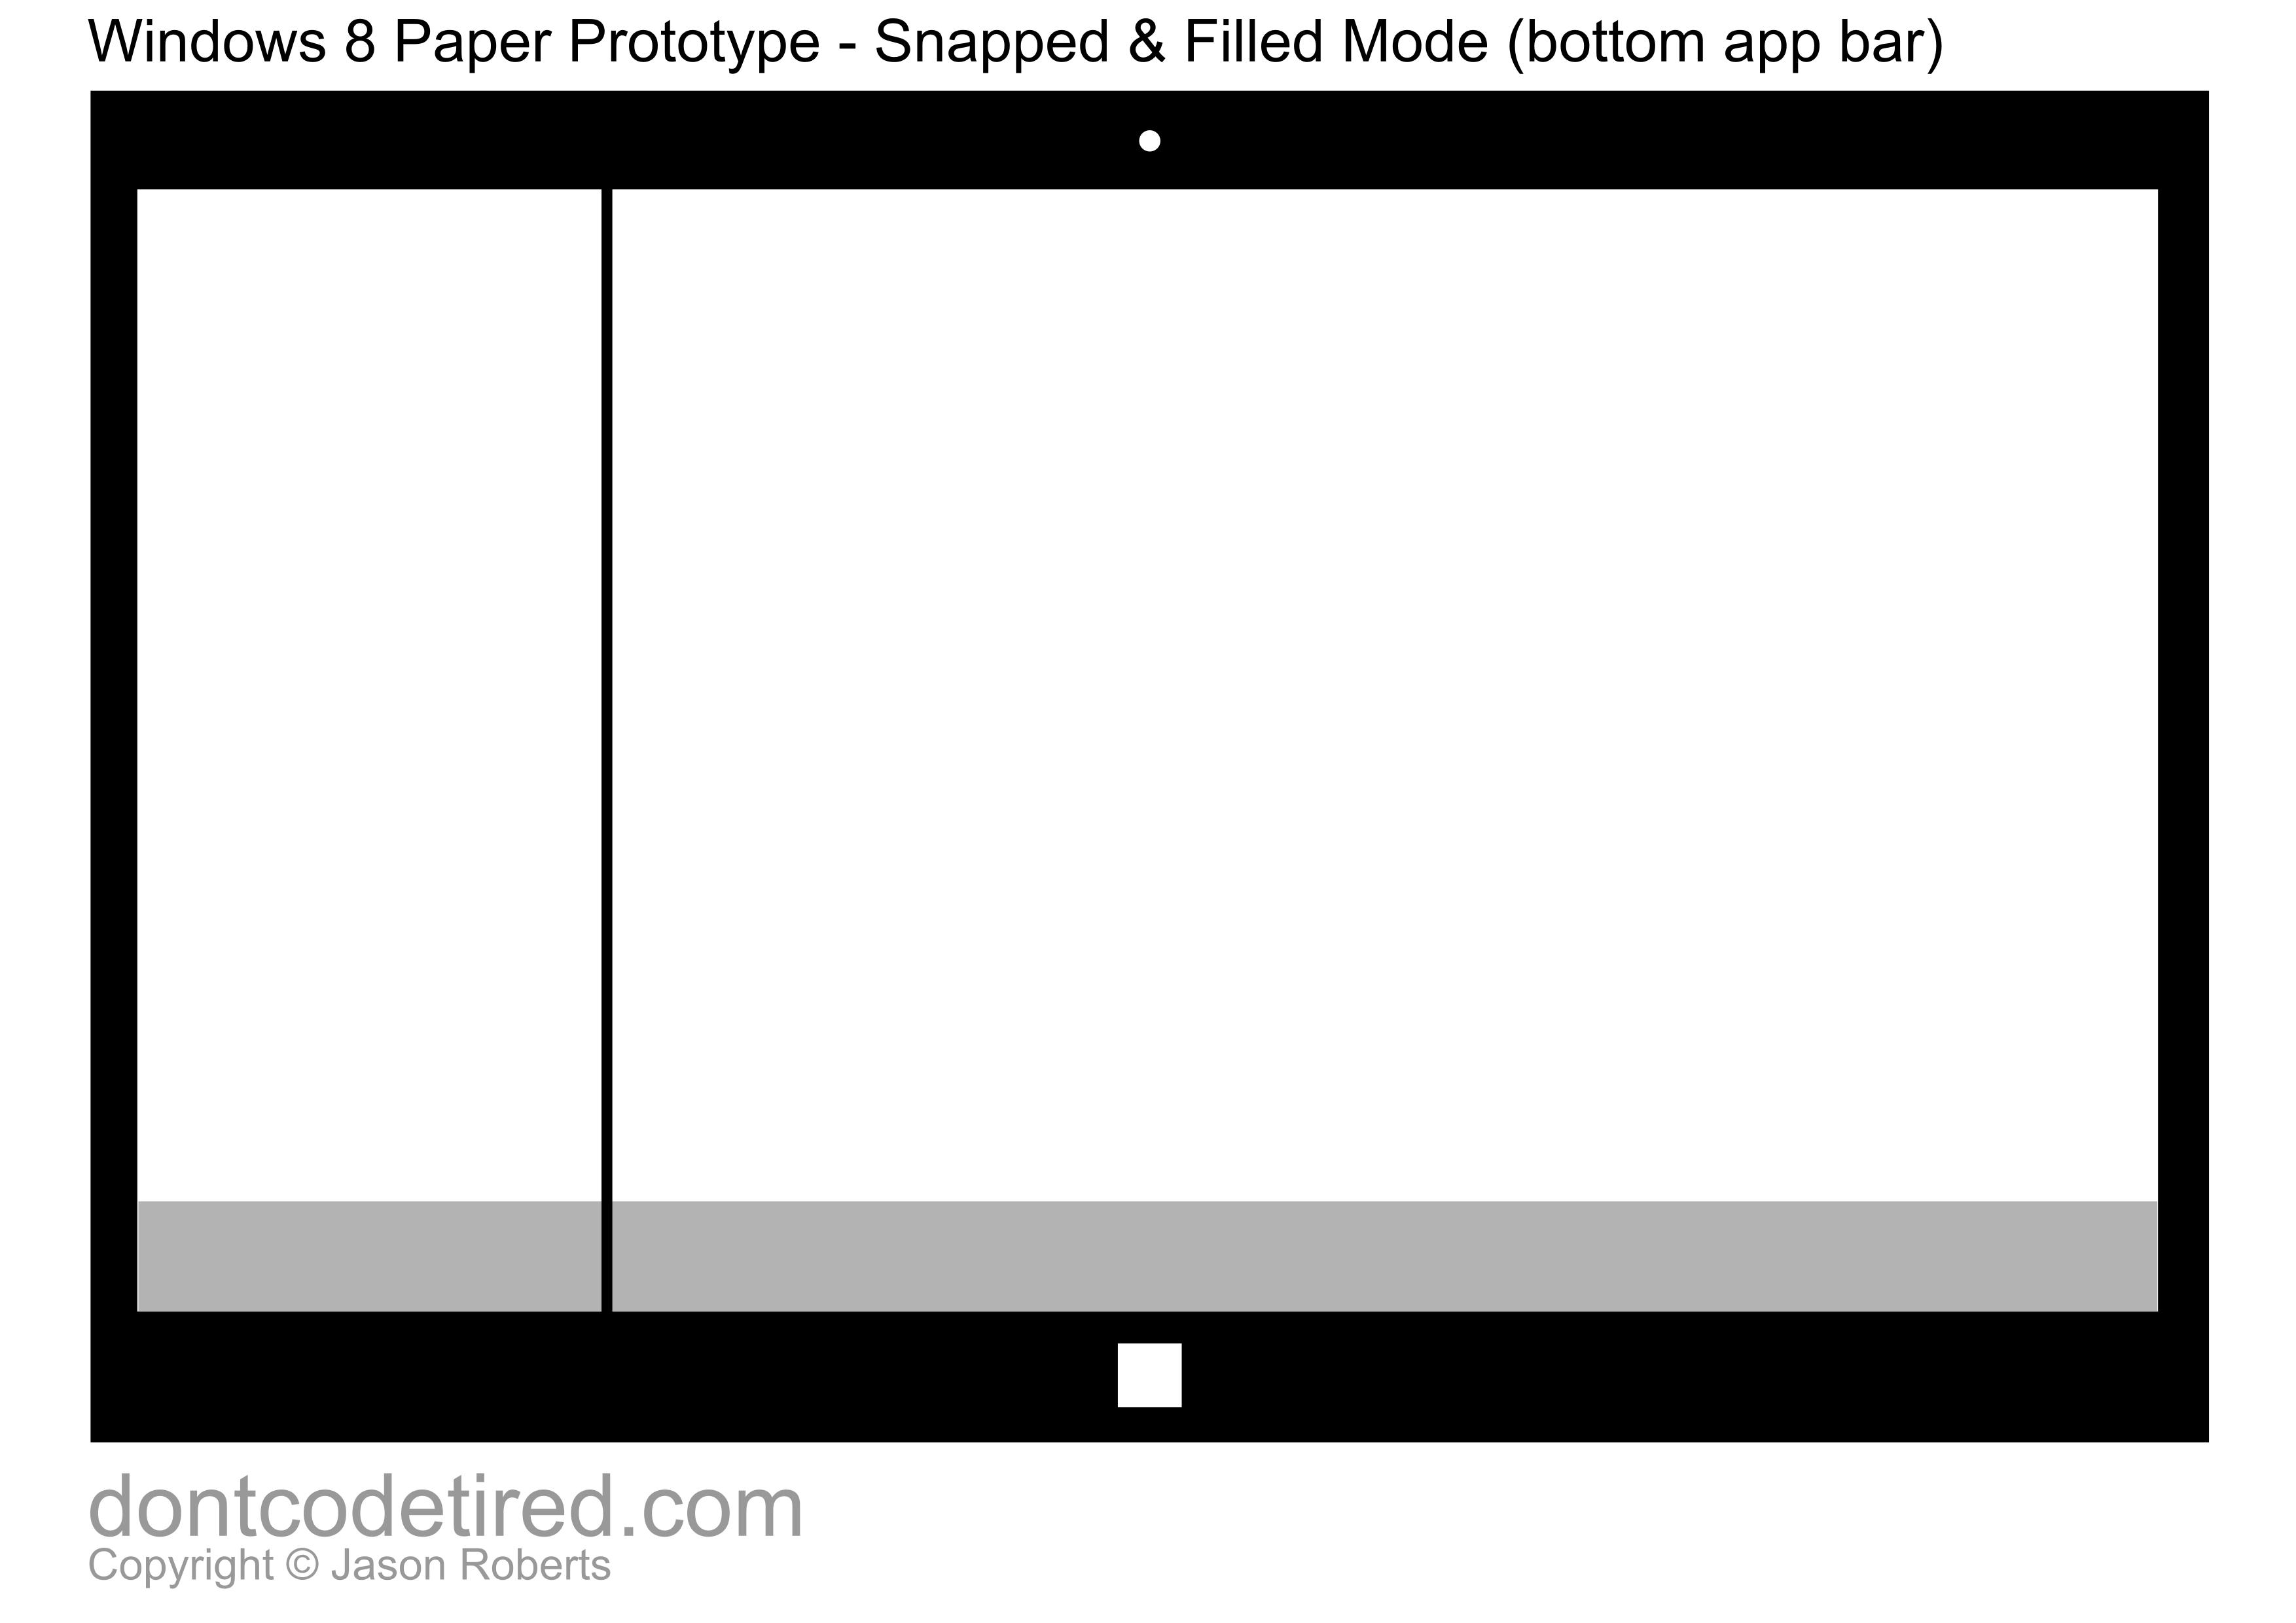 Windows 8 Paper Prototype template - snapped and filled bottom app bar